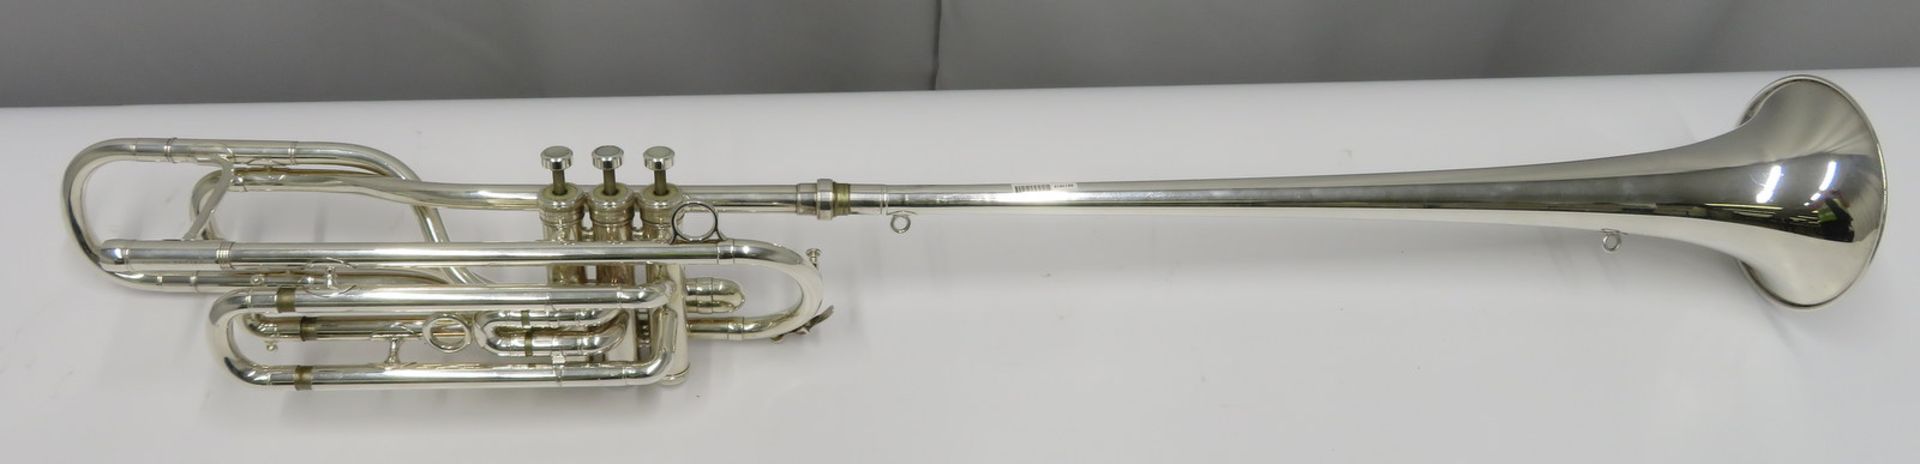 Besson International BE707 fanfare trumpet with case. Serial number: 884160. - Image 3 of 17